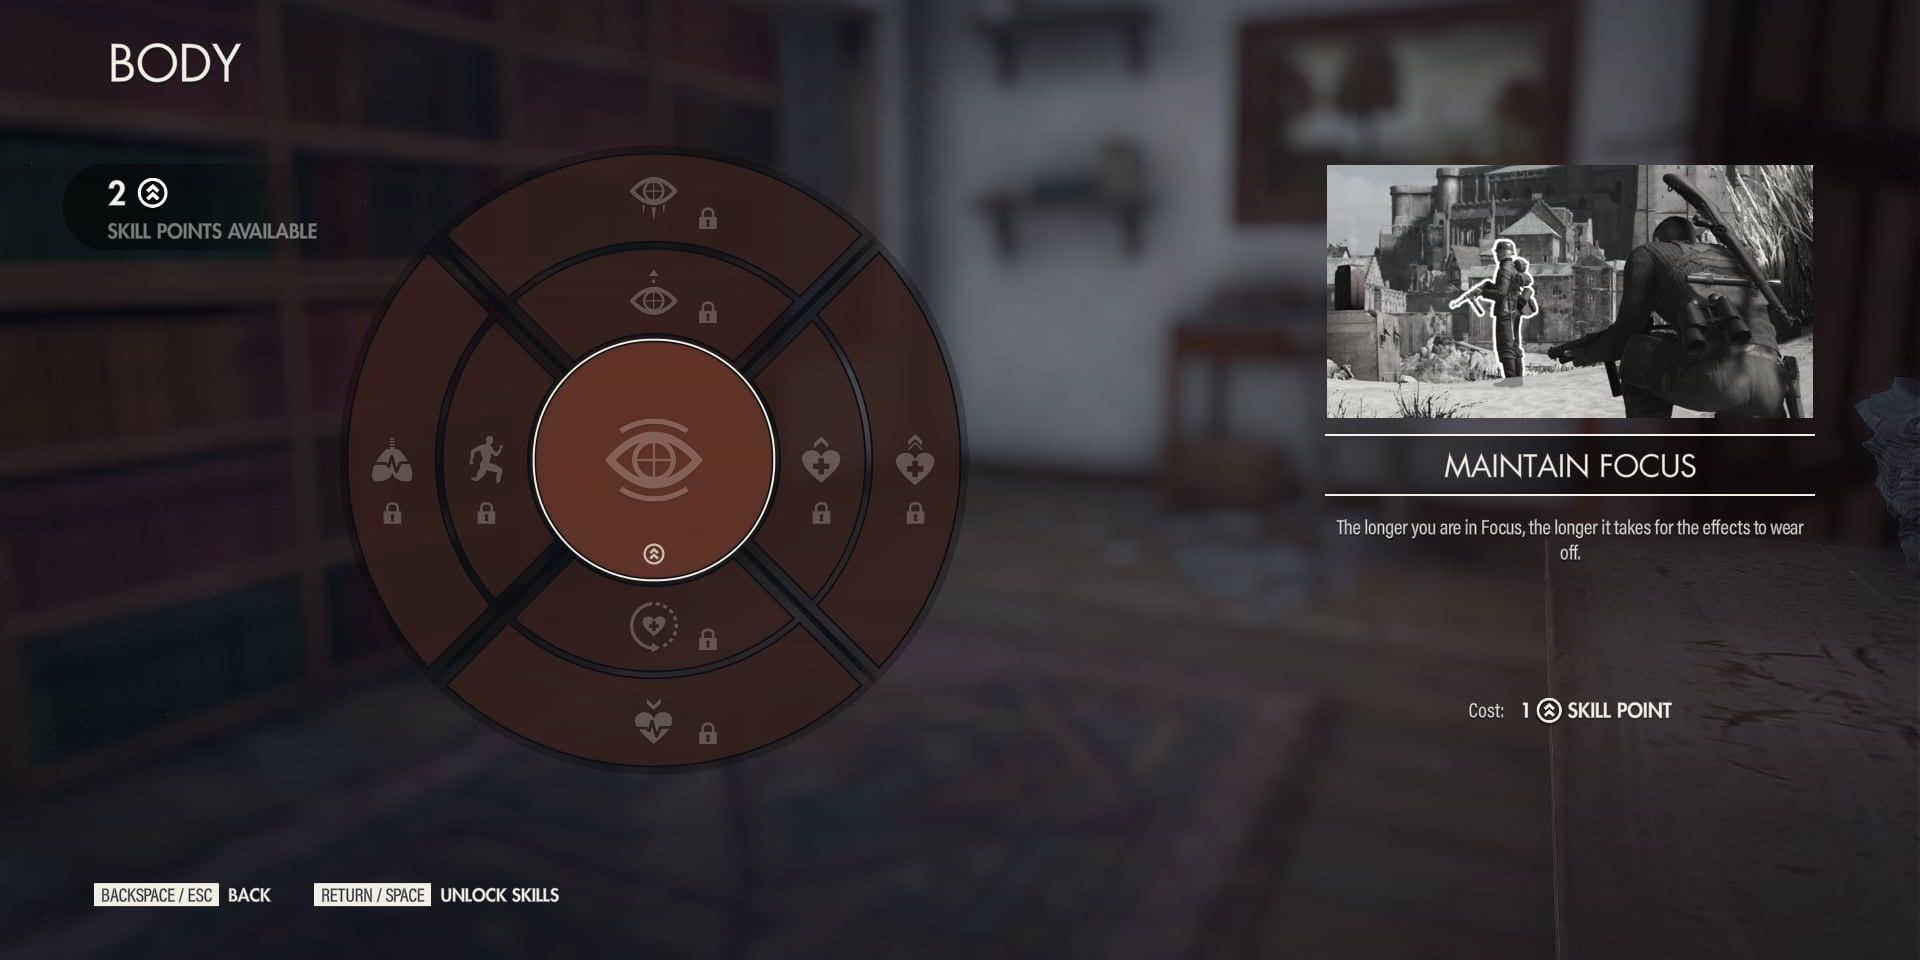 Sniper Elite 5 Skill Points showing the Body skill tree